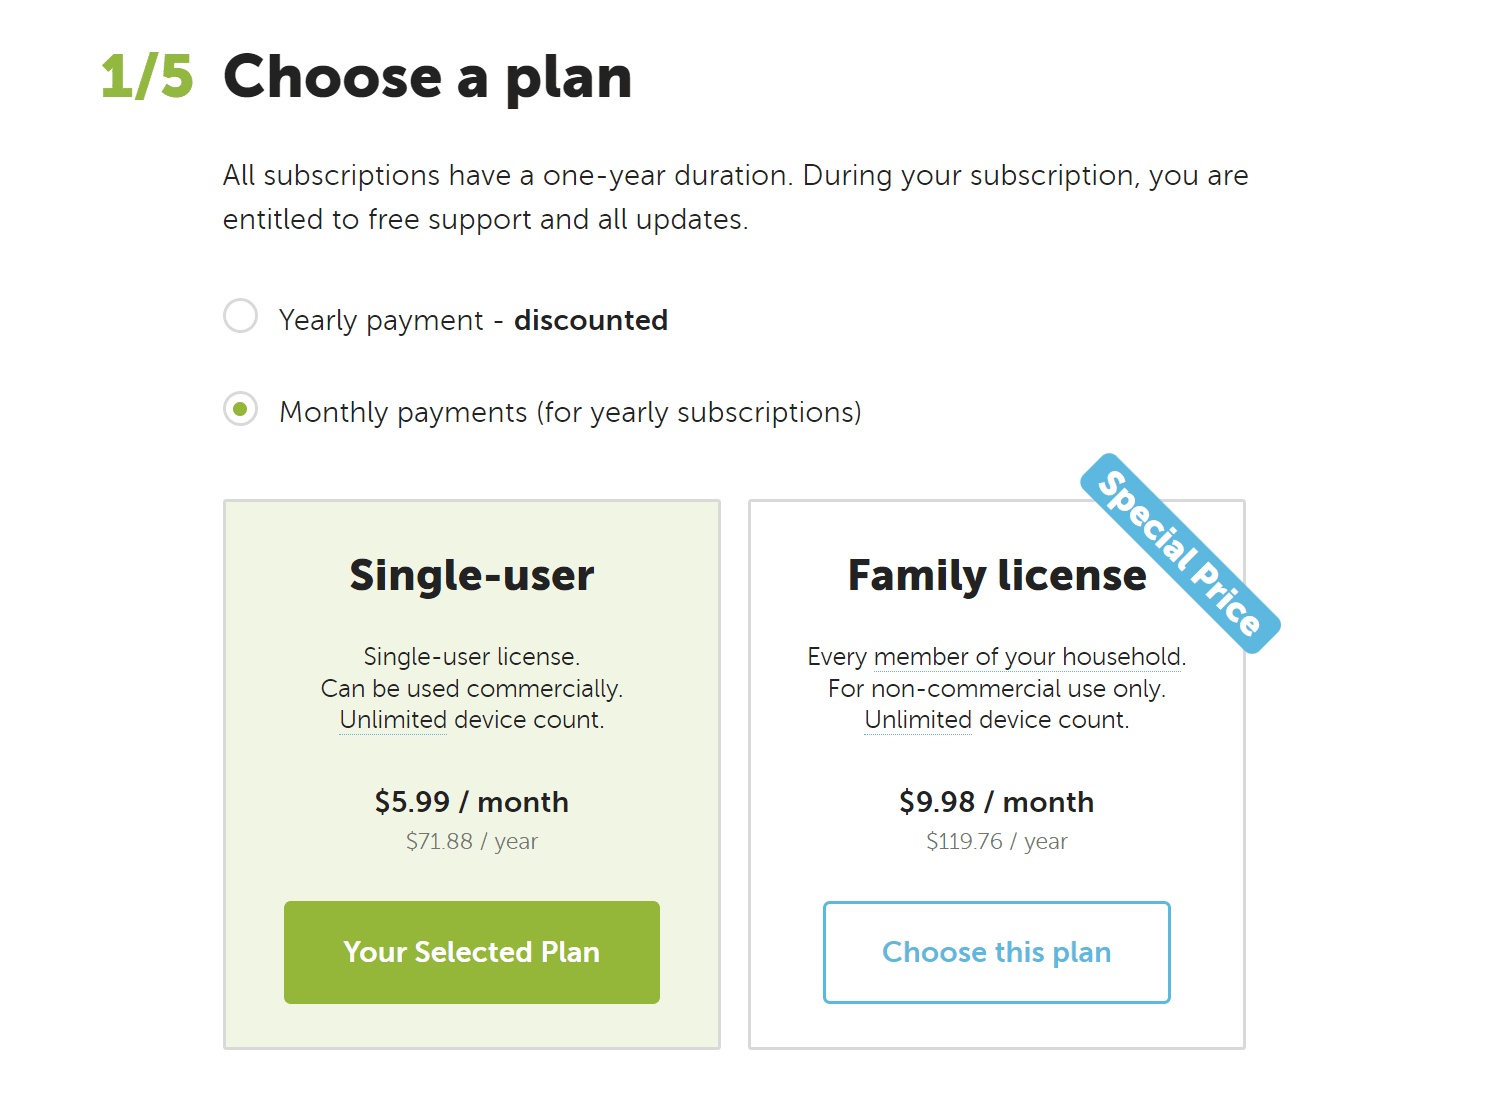 Choose a family license